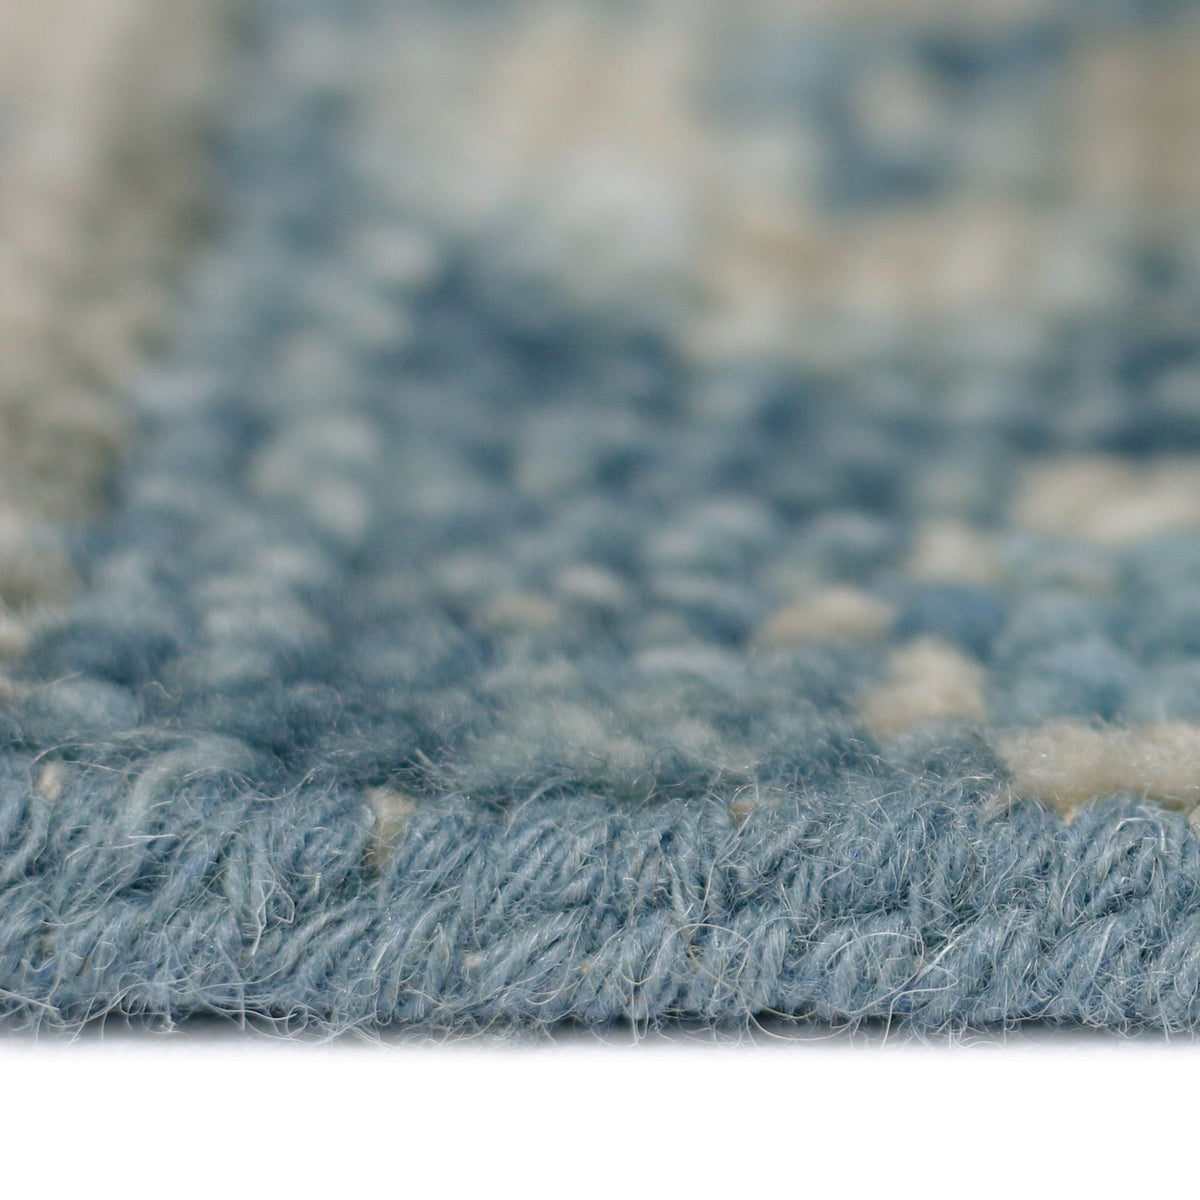 Willow WIL-1 Blue Rug - Rug & Home